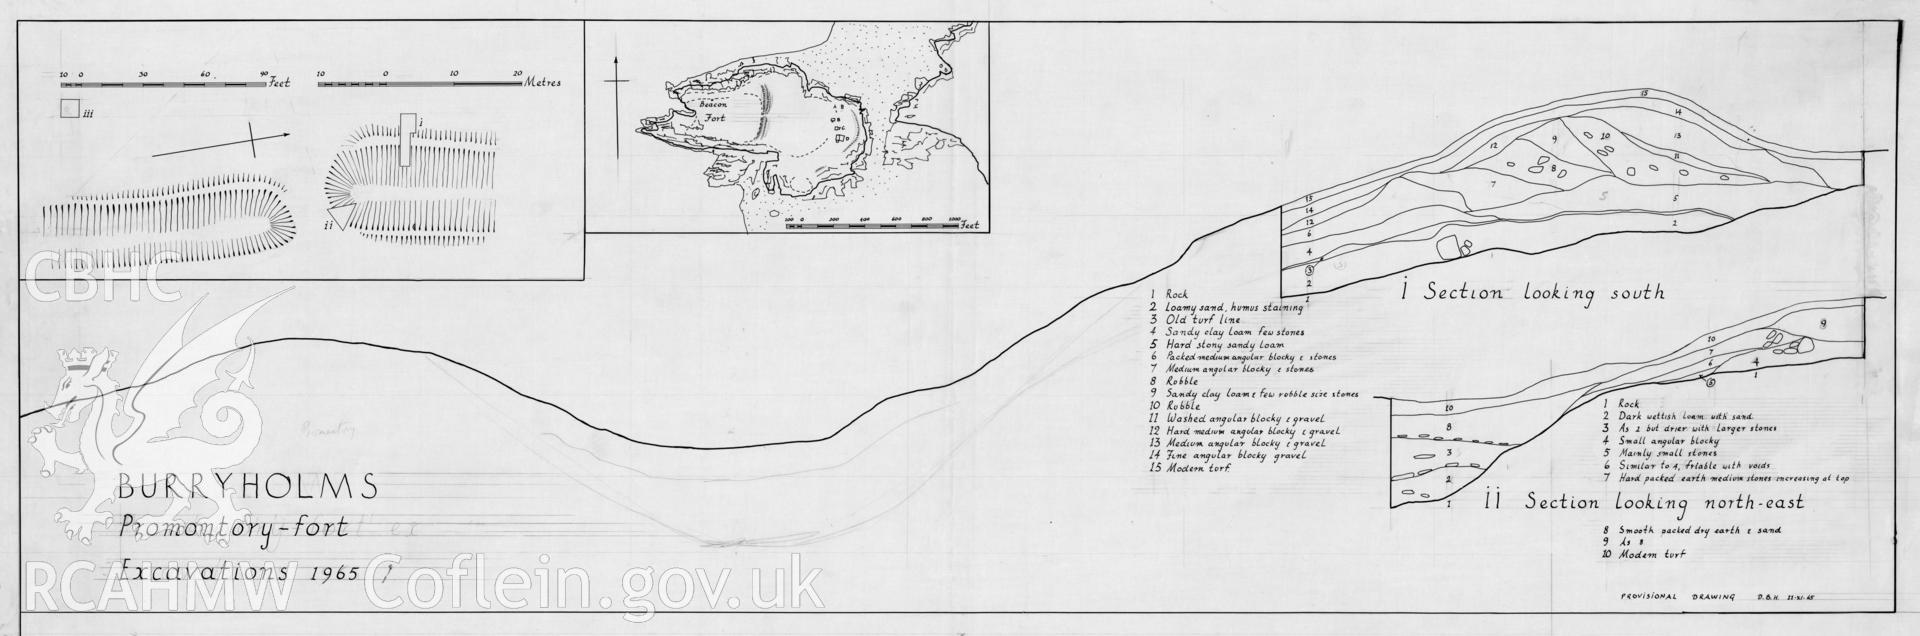 Digital copy of a measured section and plan of Burry Holms promontory fort and excavation in 1965.